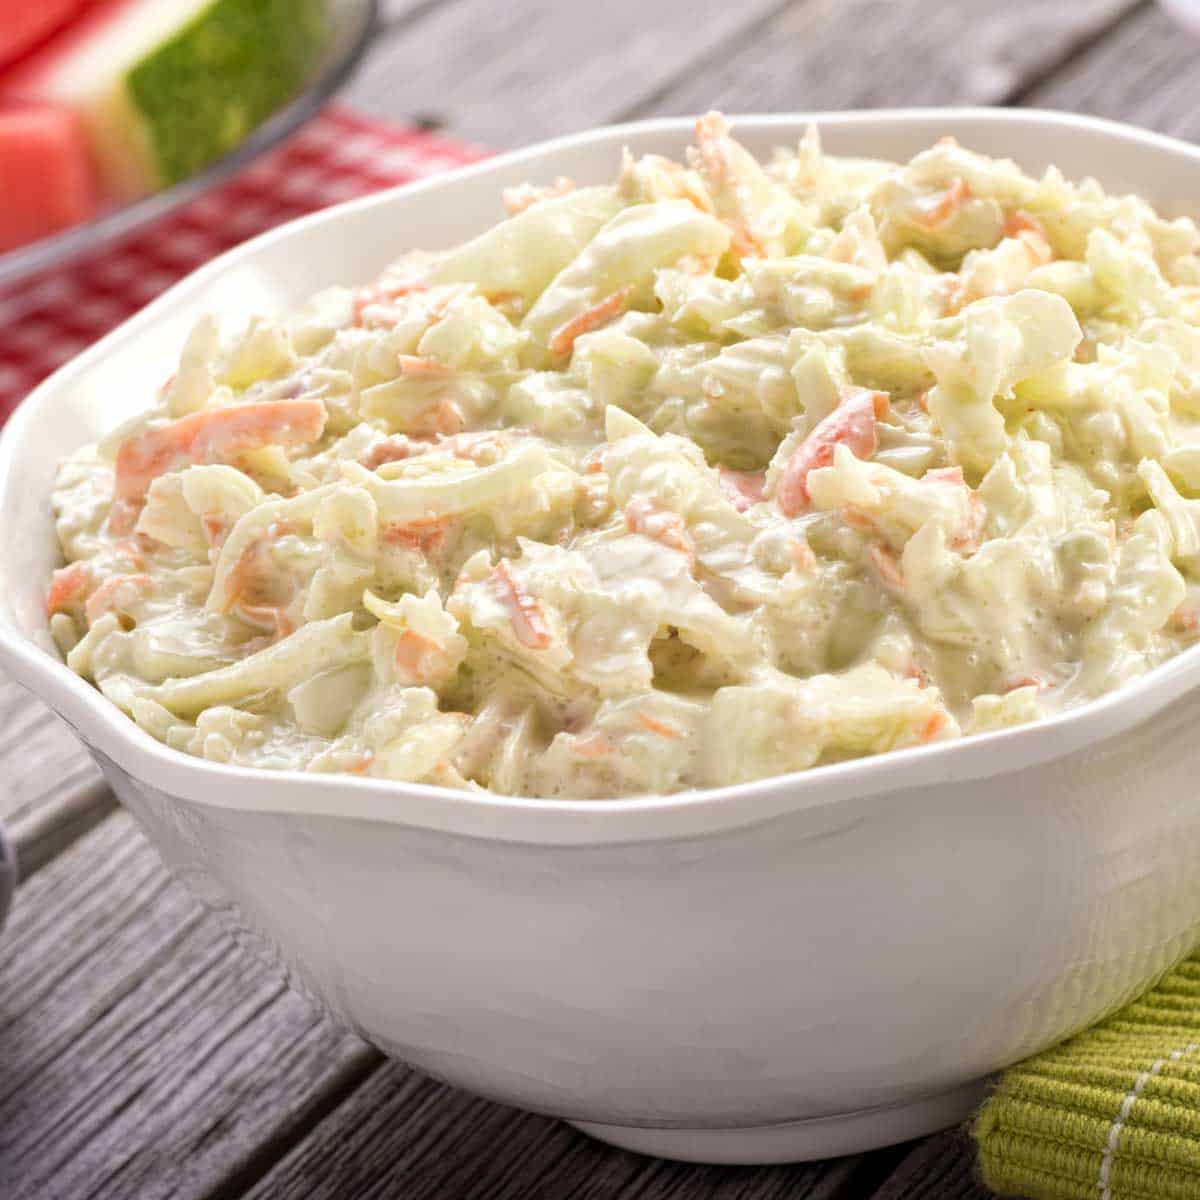 white bowl showing a portion of Coleslaw with Lemon Mayonnaise Dresisng